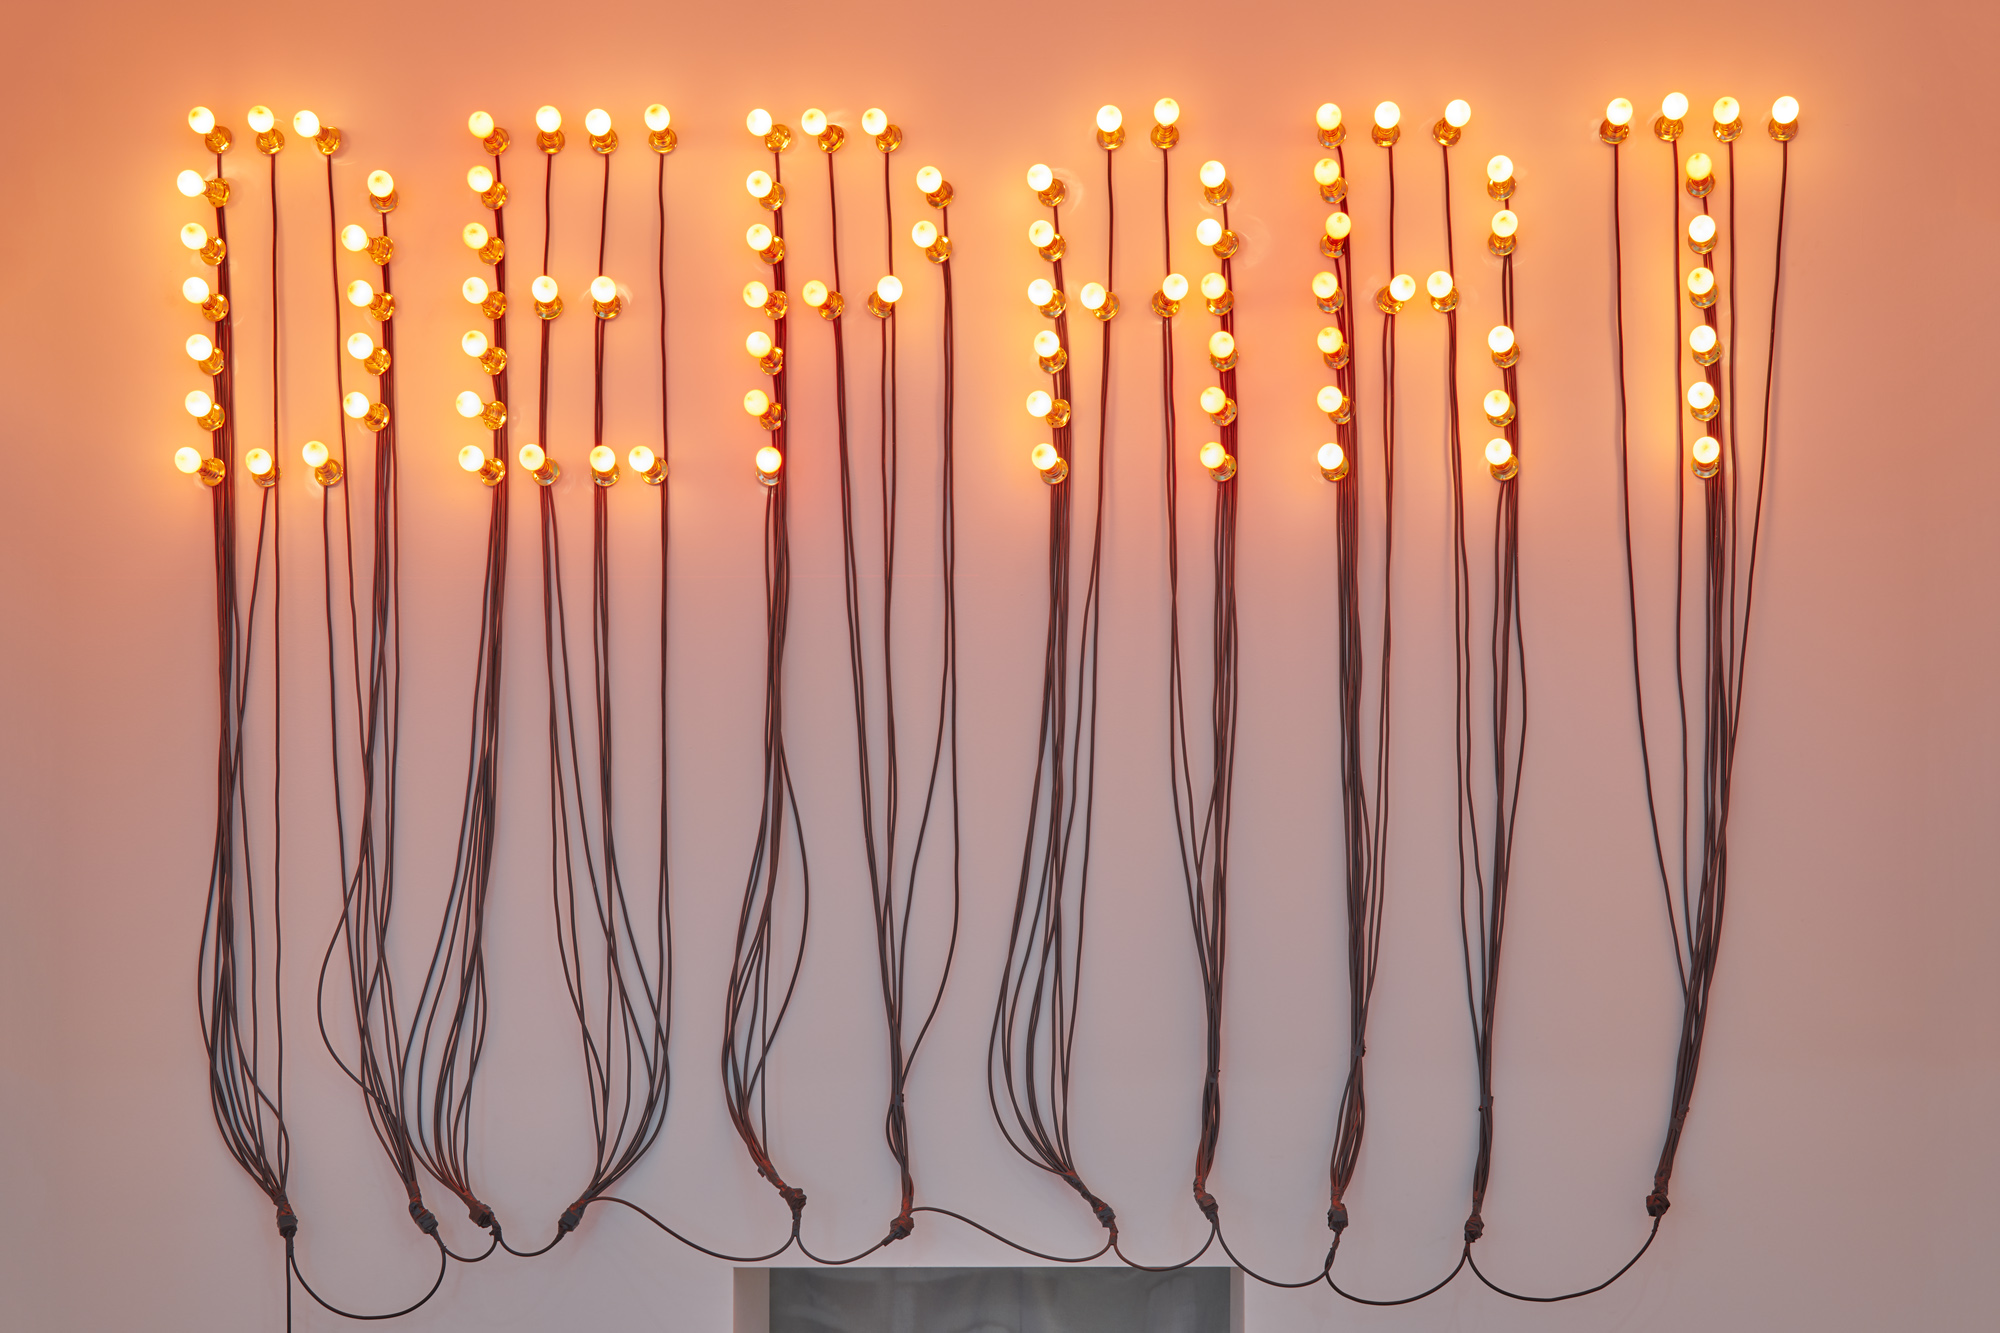 DÃ©part (Departure), 2015 86 red light bulbs, electric wire